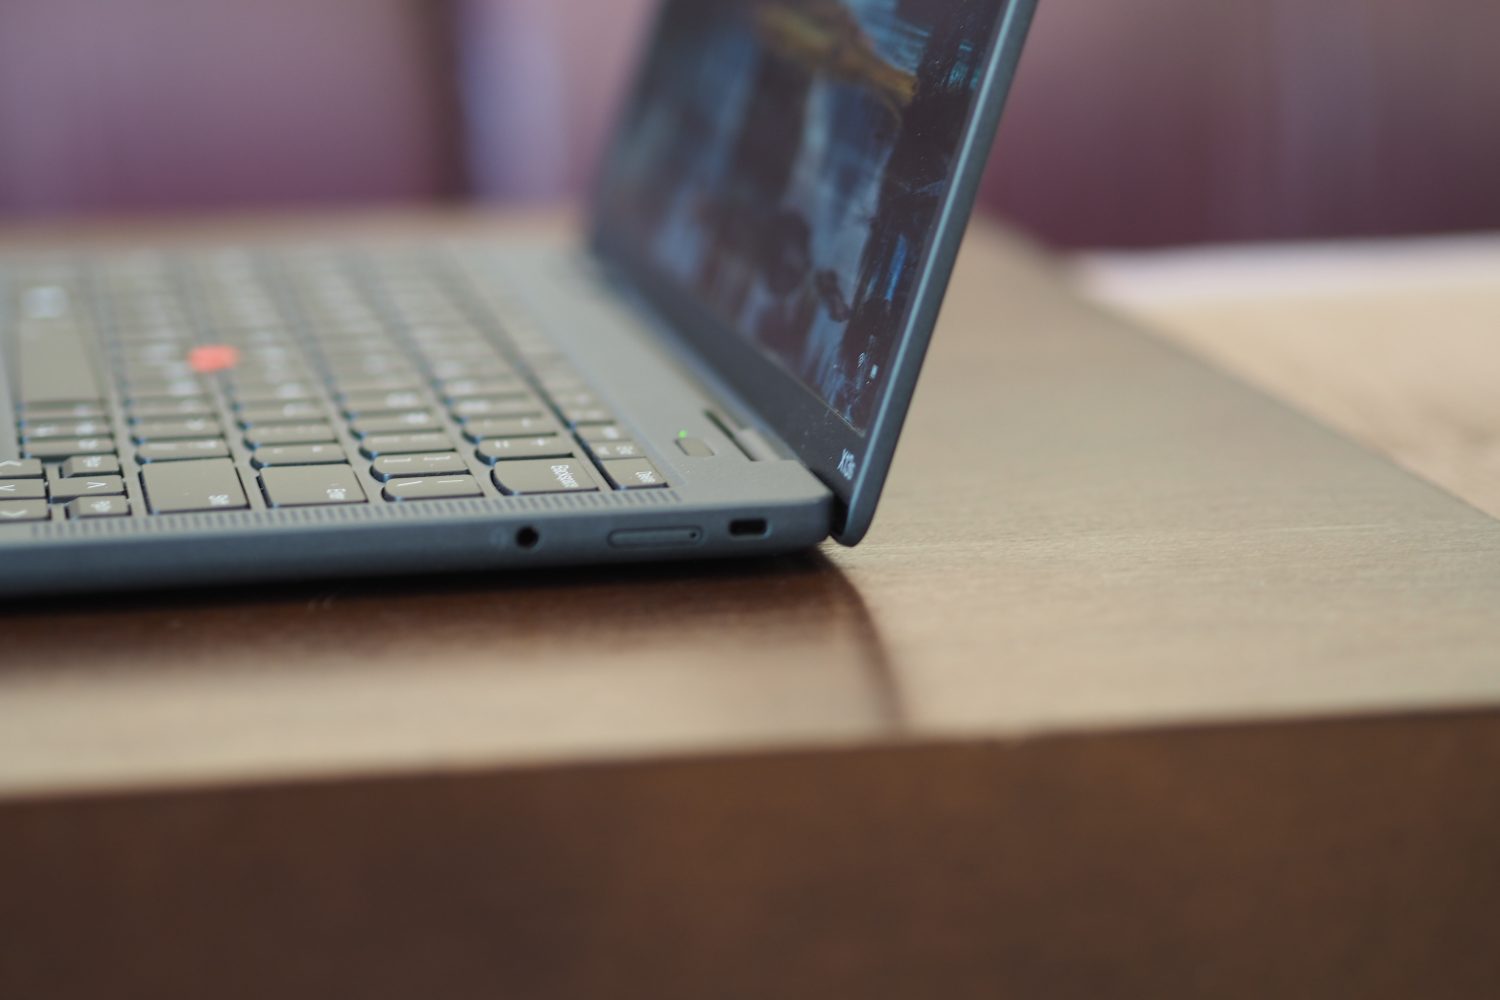 Meet NovaGo: the ARM-based Windows 10 laptop with a 22-hour battery and LTE  - Edge Up